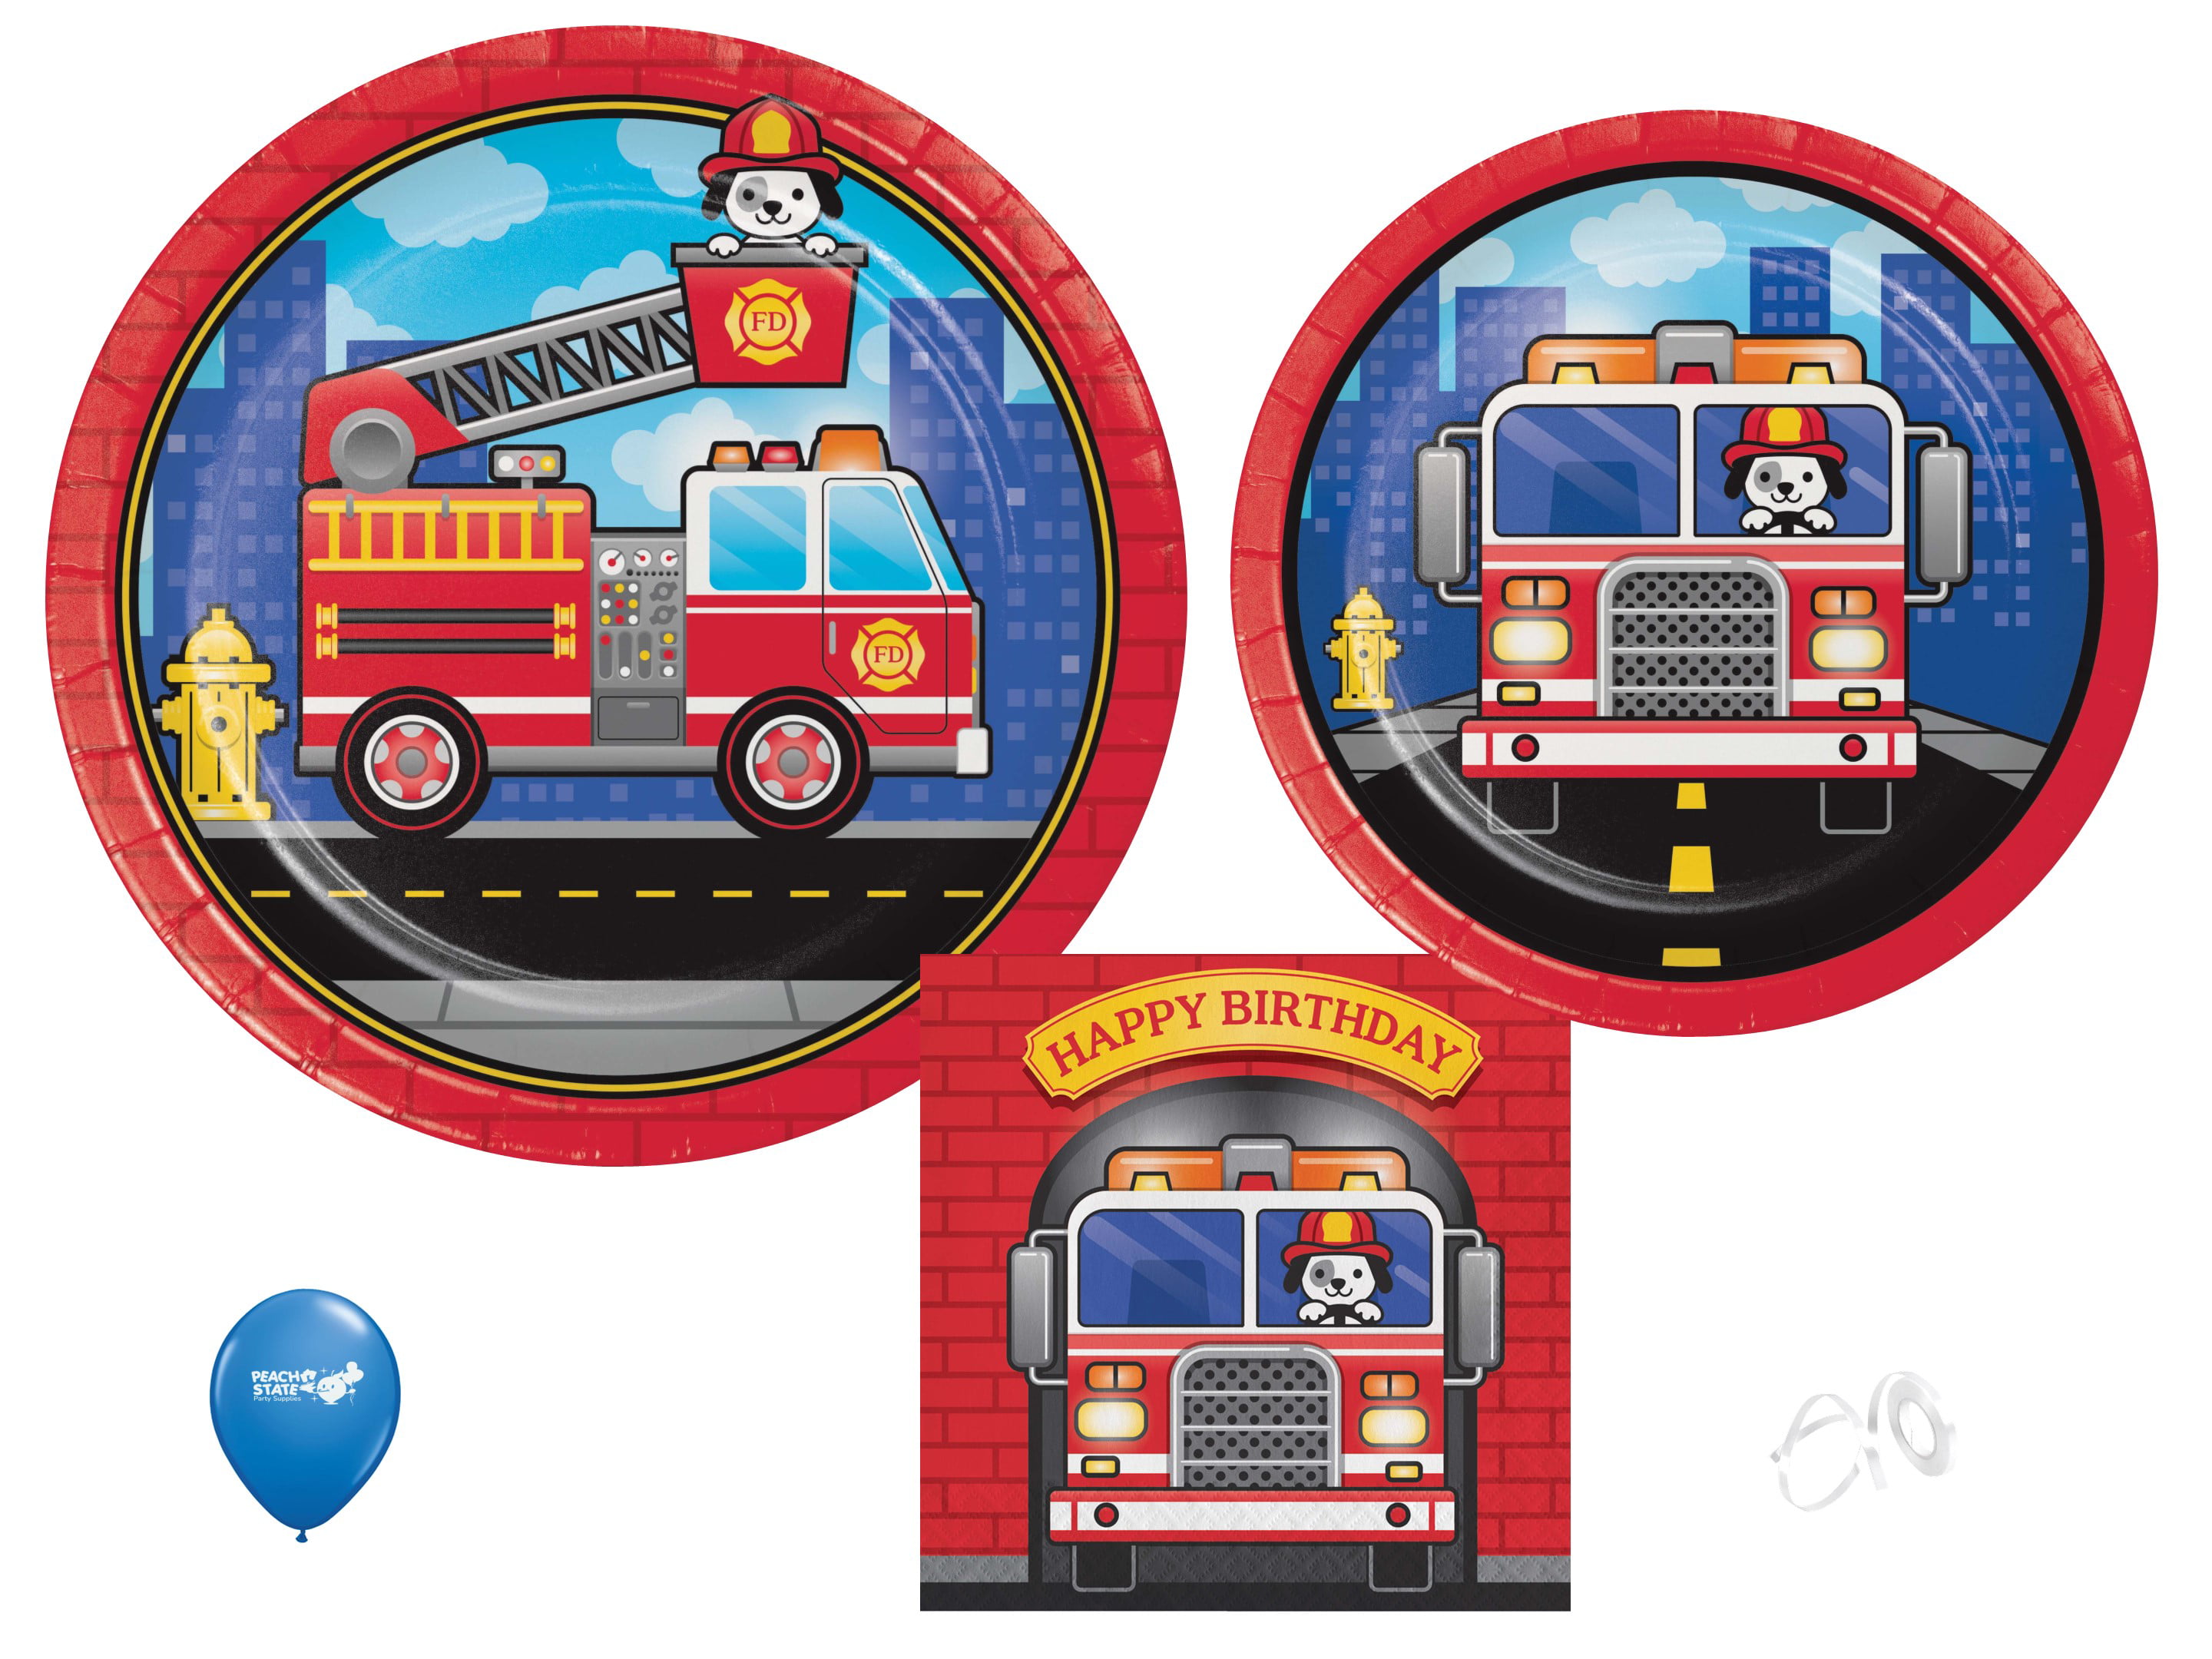  Fire Heroes Table Cloth Firefighter Themed Birthday Party  Supplies Plastic Firefighter Table Cover Flame Theme Firefighter Tablecloth  for Party School Activity(3 Pieces) : Toys & Games